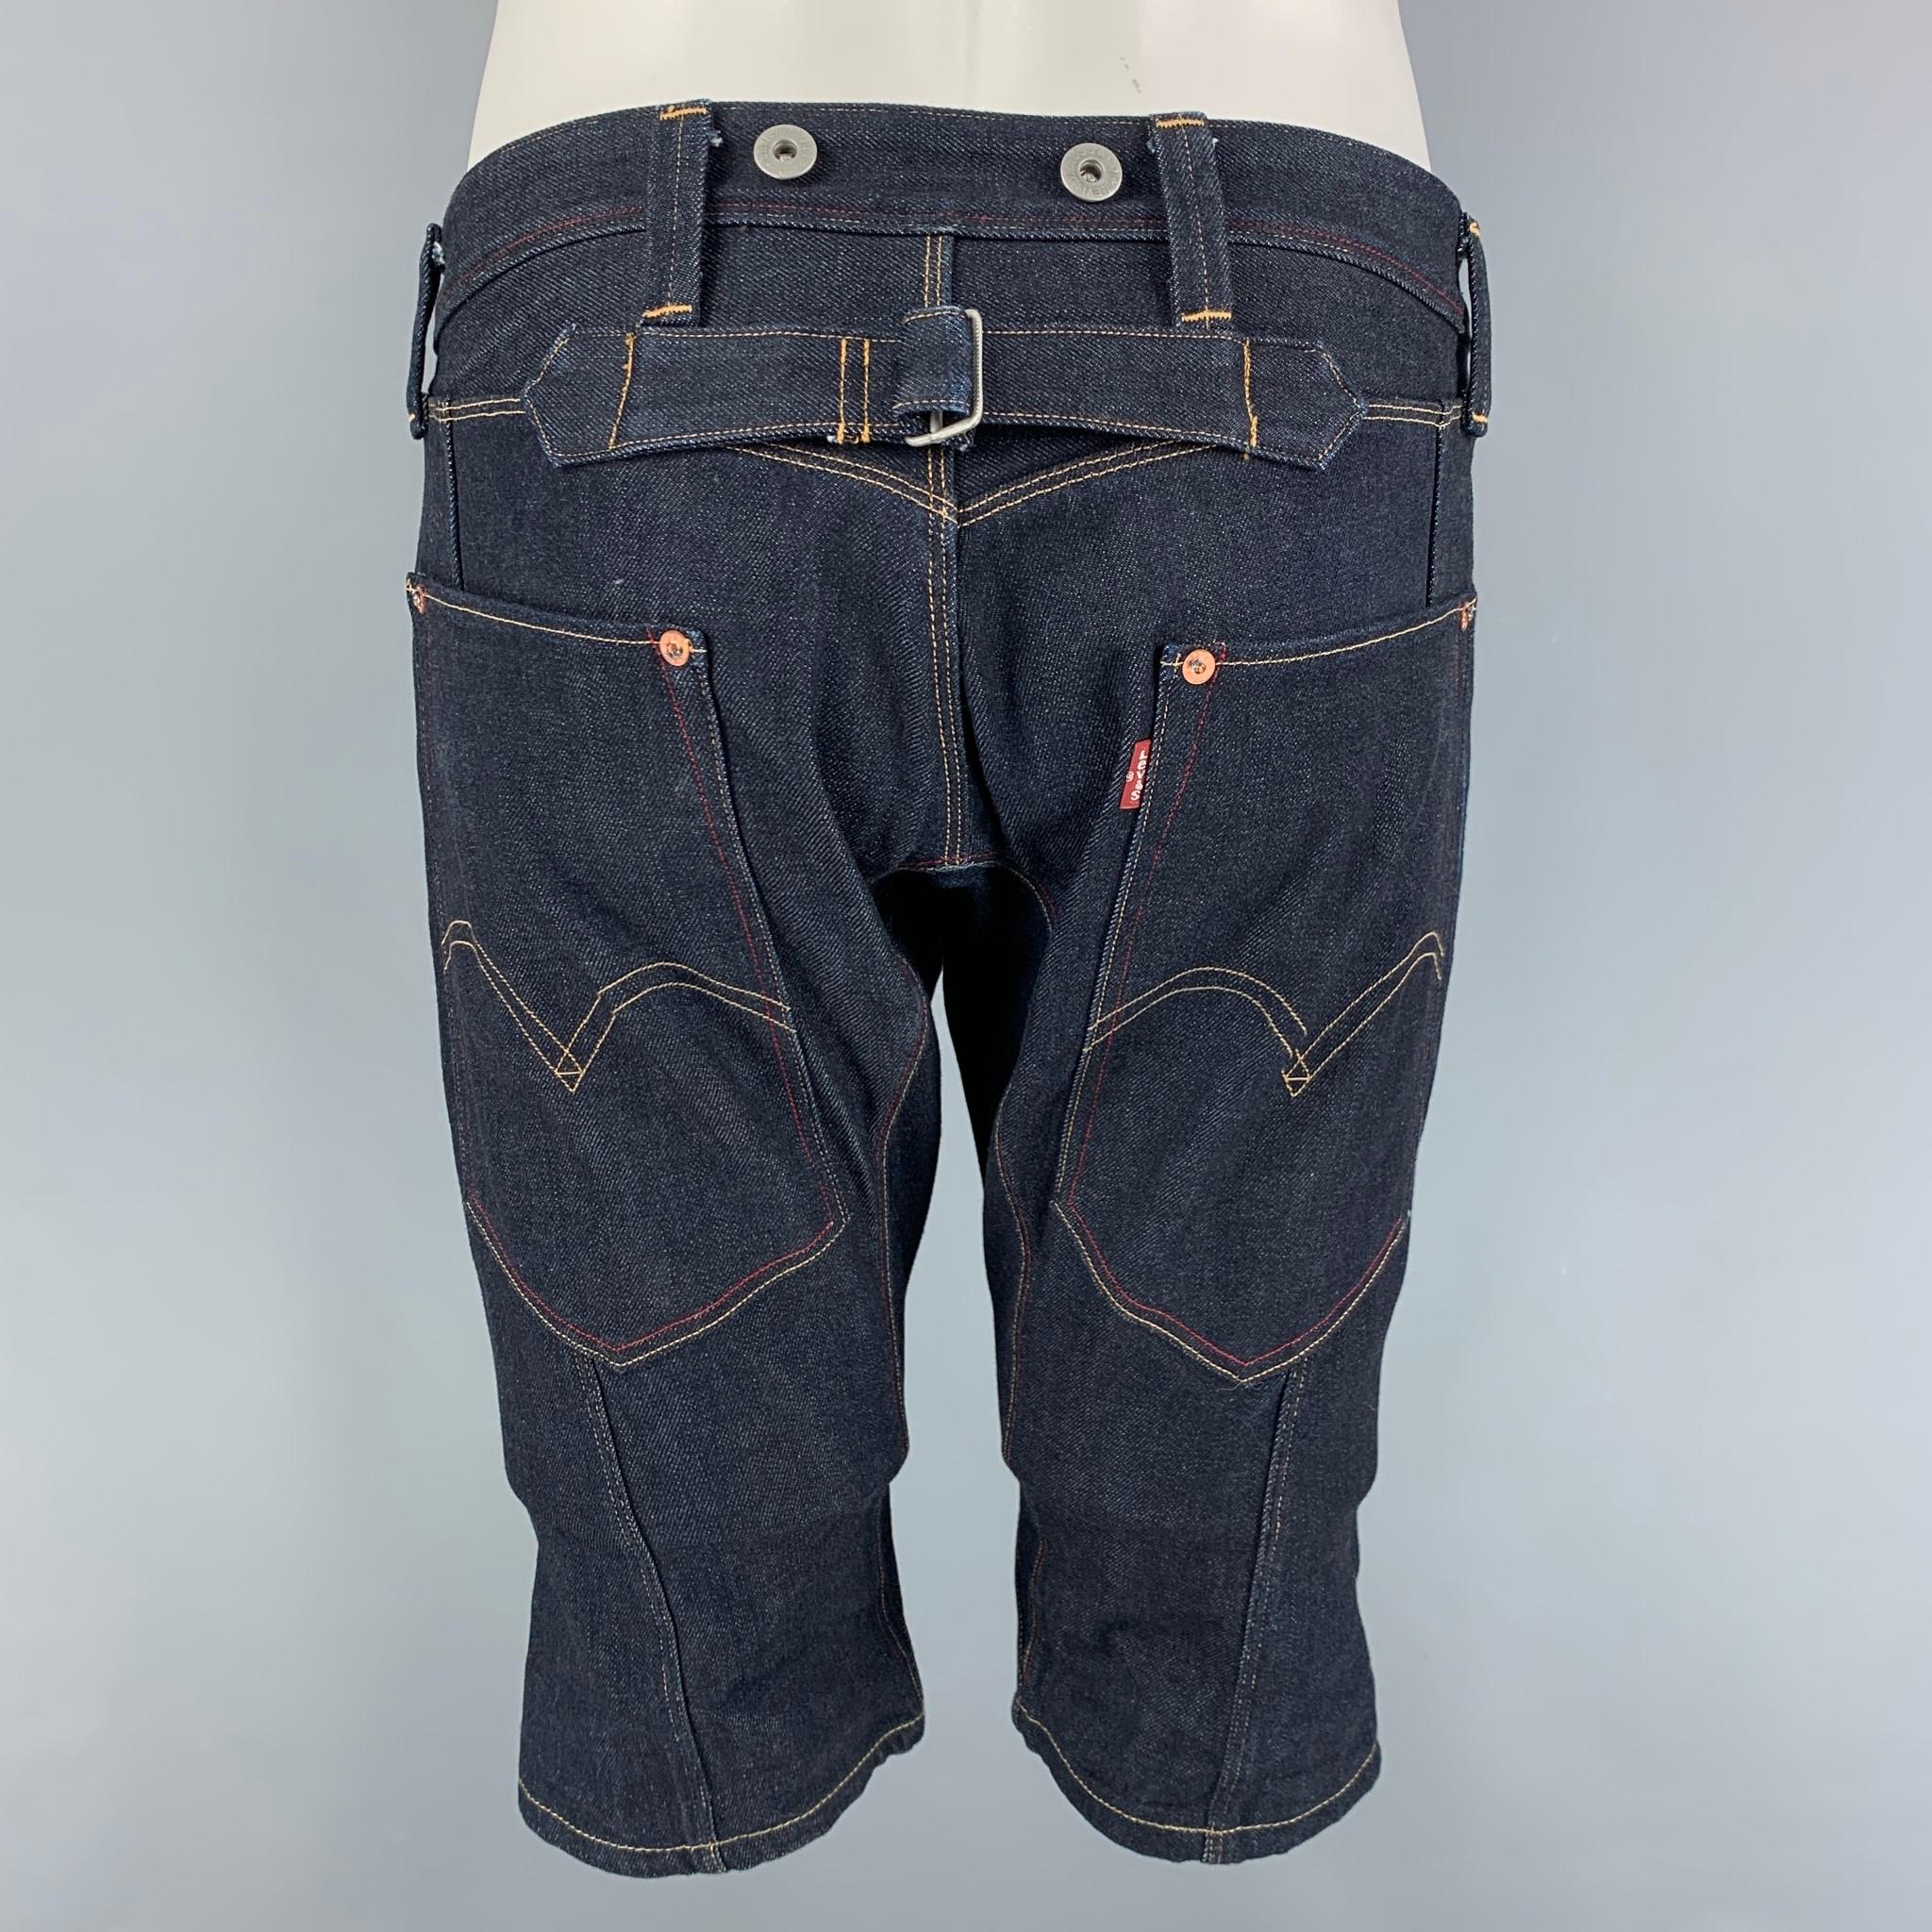 JUNYA WATANABE shorts comes in a indigo denim featuring a back strap, contrast stitching, and a zip fly closure. Made in Japan. 

Very Good Pre-Owned Condition.
Marked: S

Measurements:

Waist: 32 in.
Rise: 11 in.
Inseam: 13 in. 